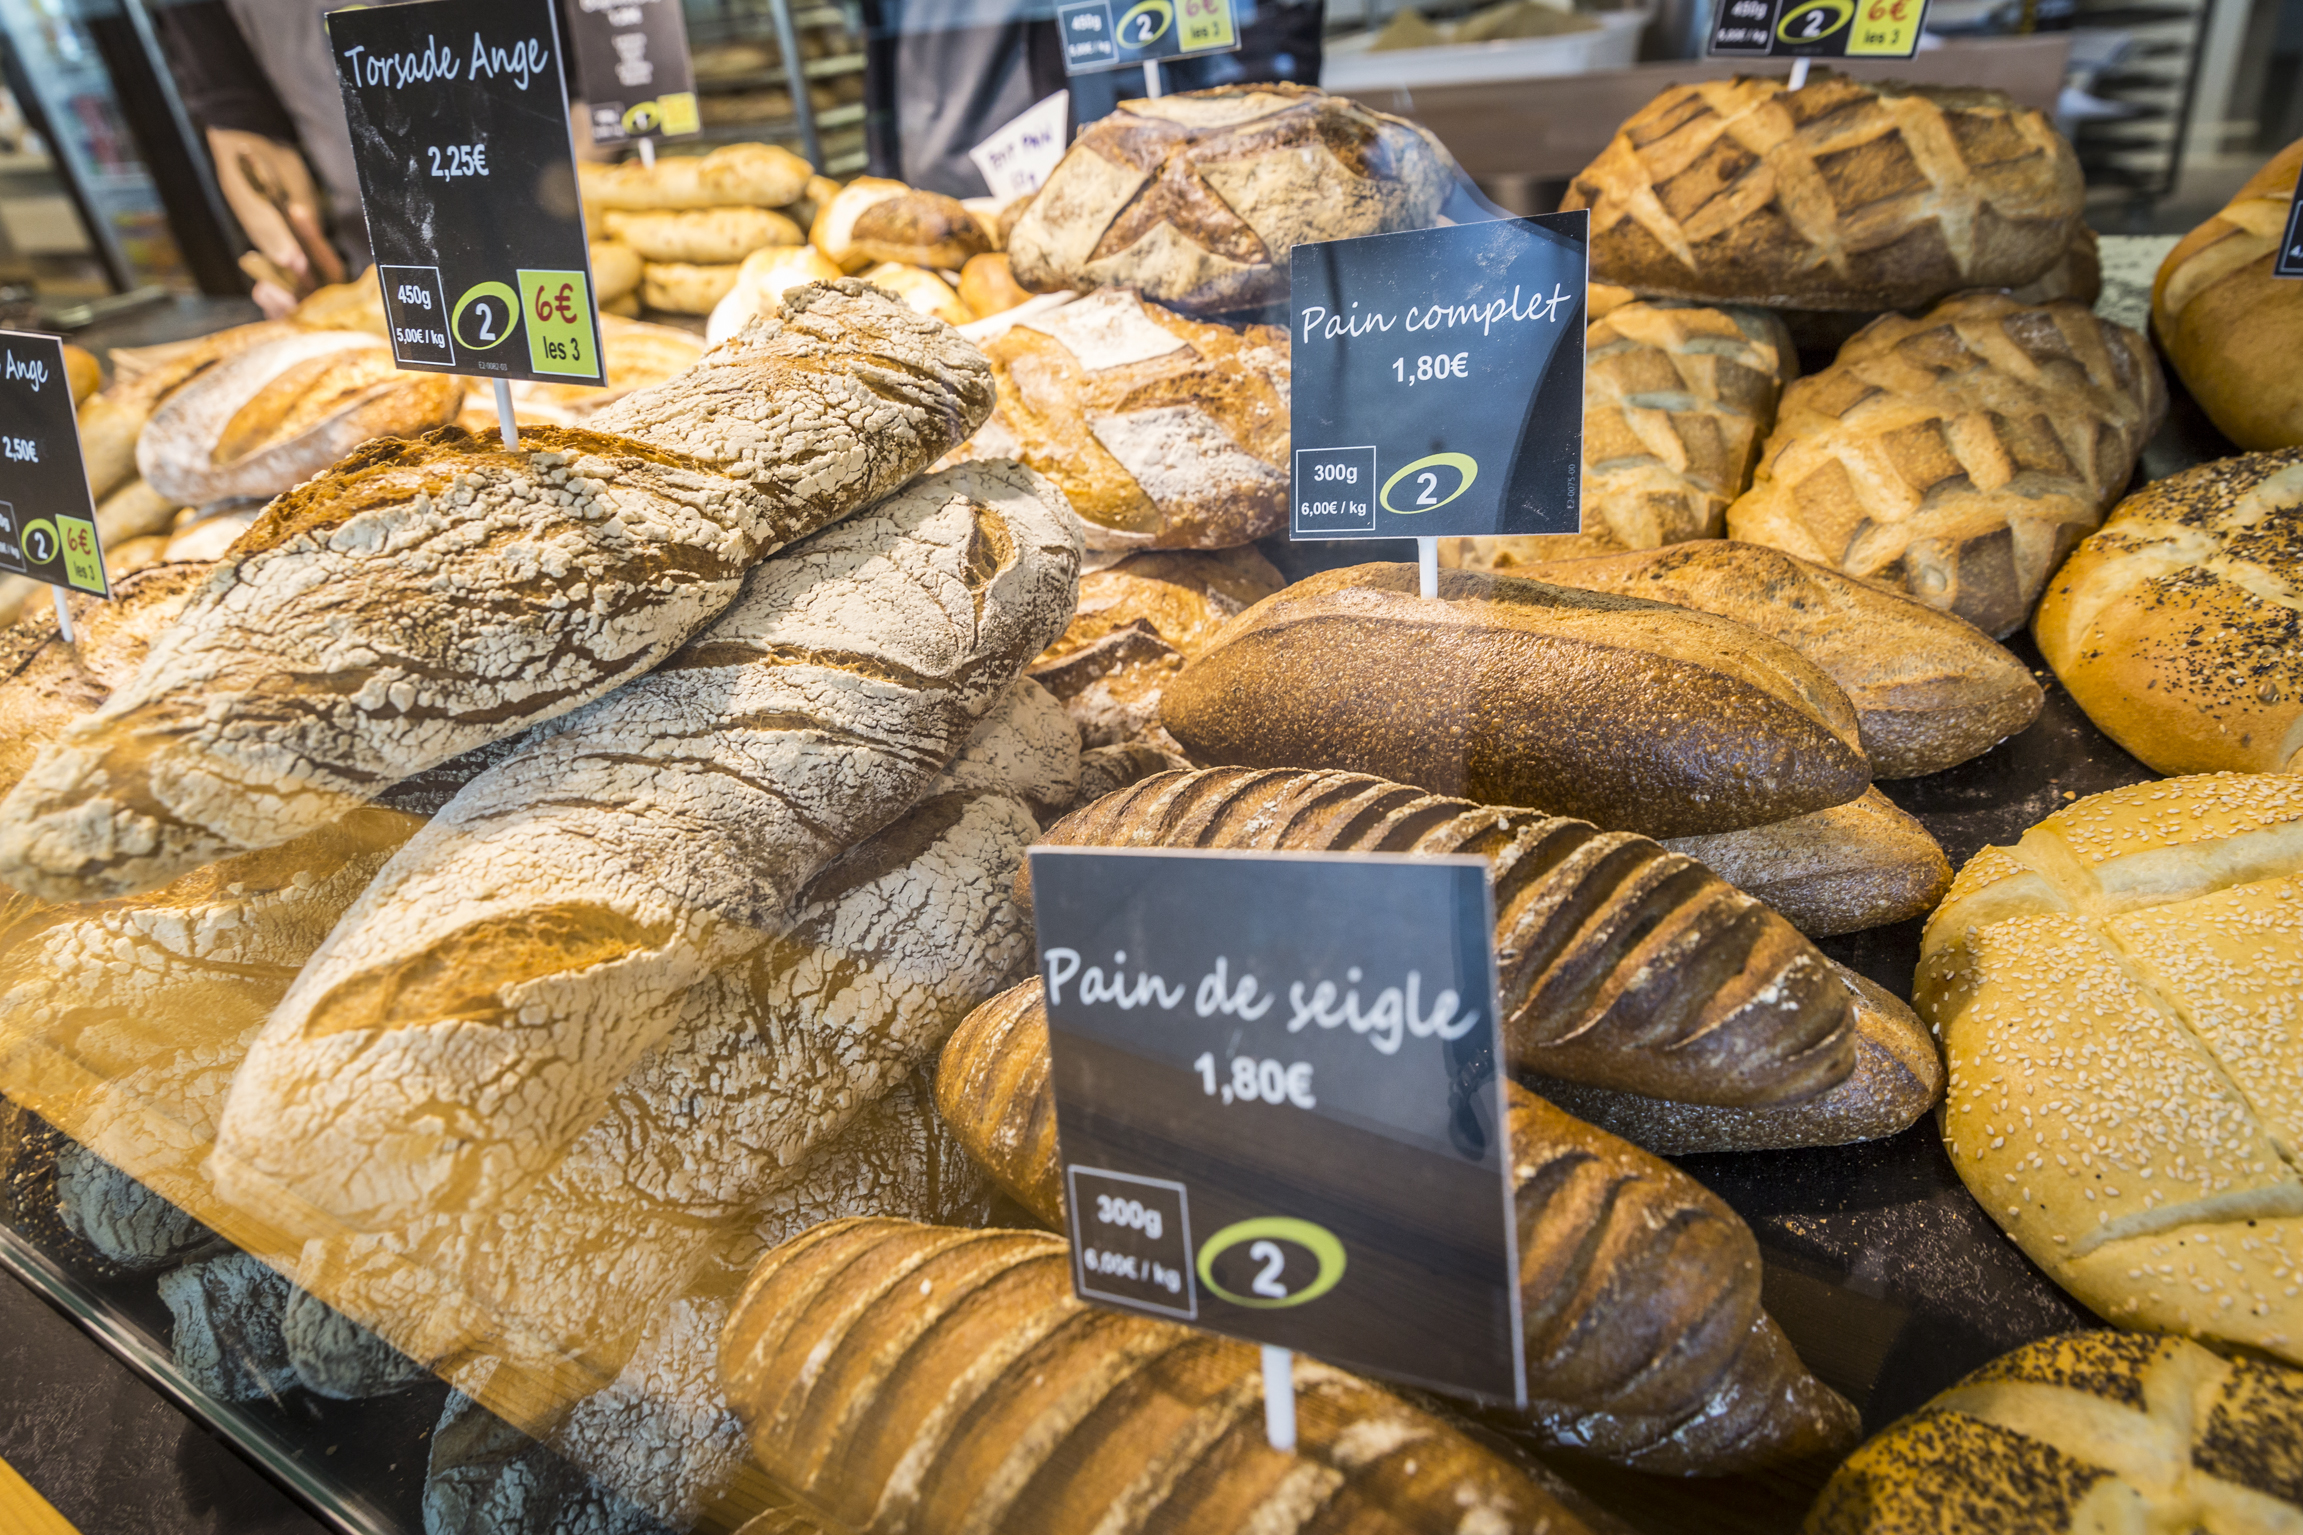 photo reportage client boulangerie ange metz marly lorraine